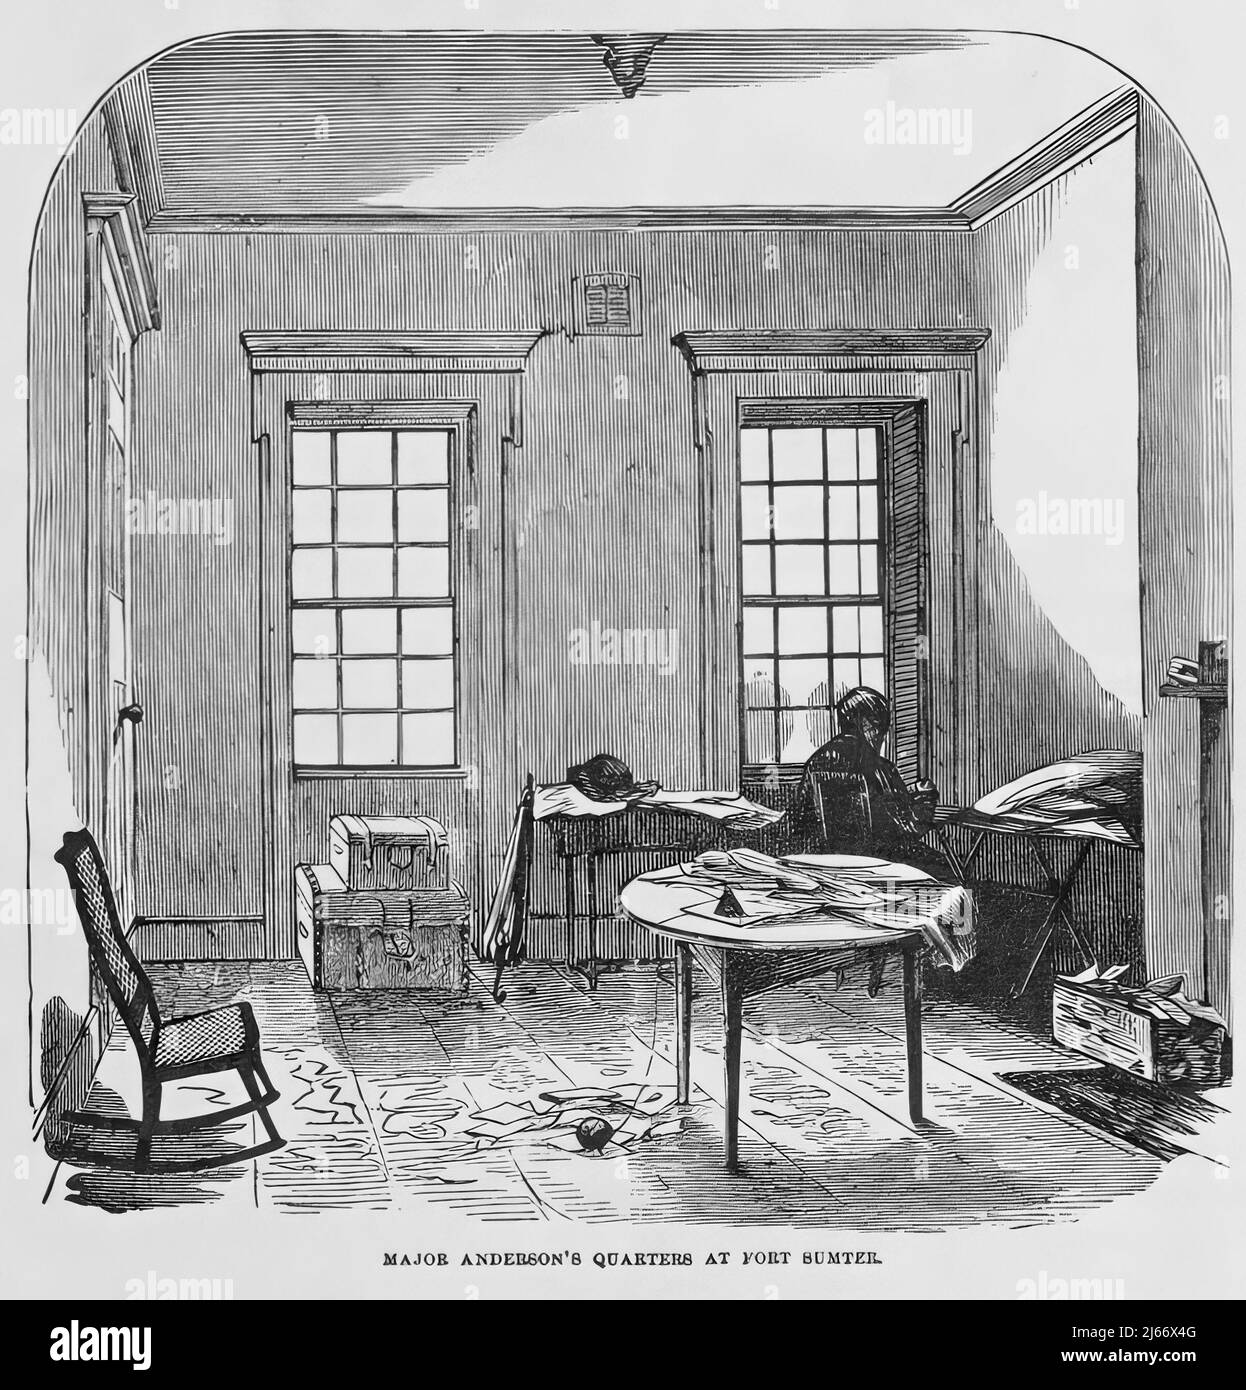 Major Robert Anderson's Quarters at Fort Sumter, in the American Civil War. 19th century illustration Stock Photo